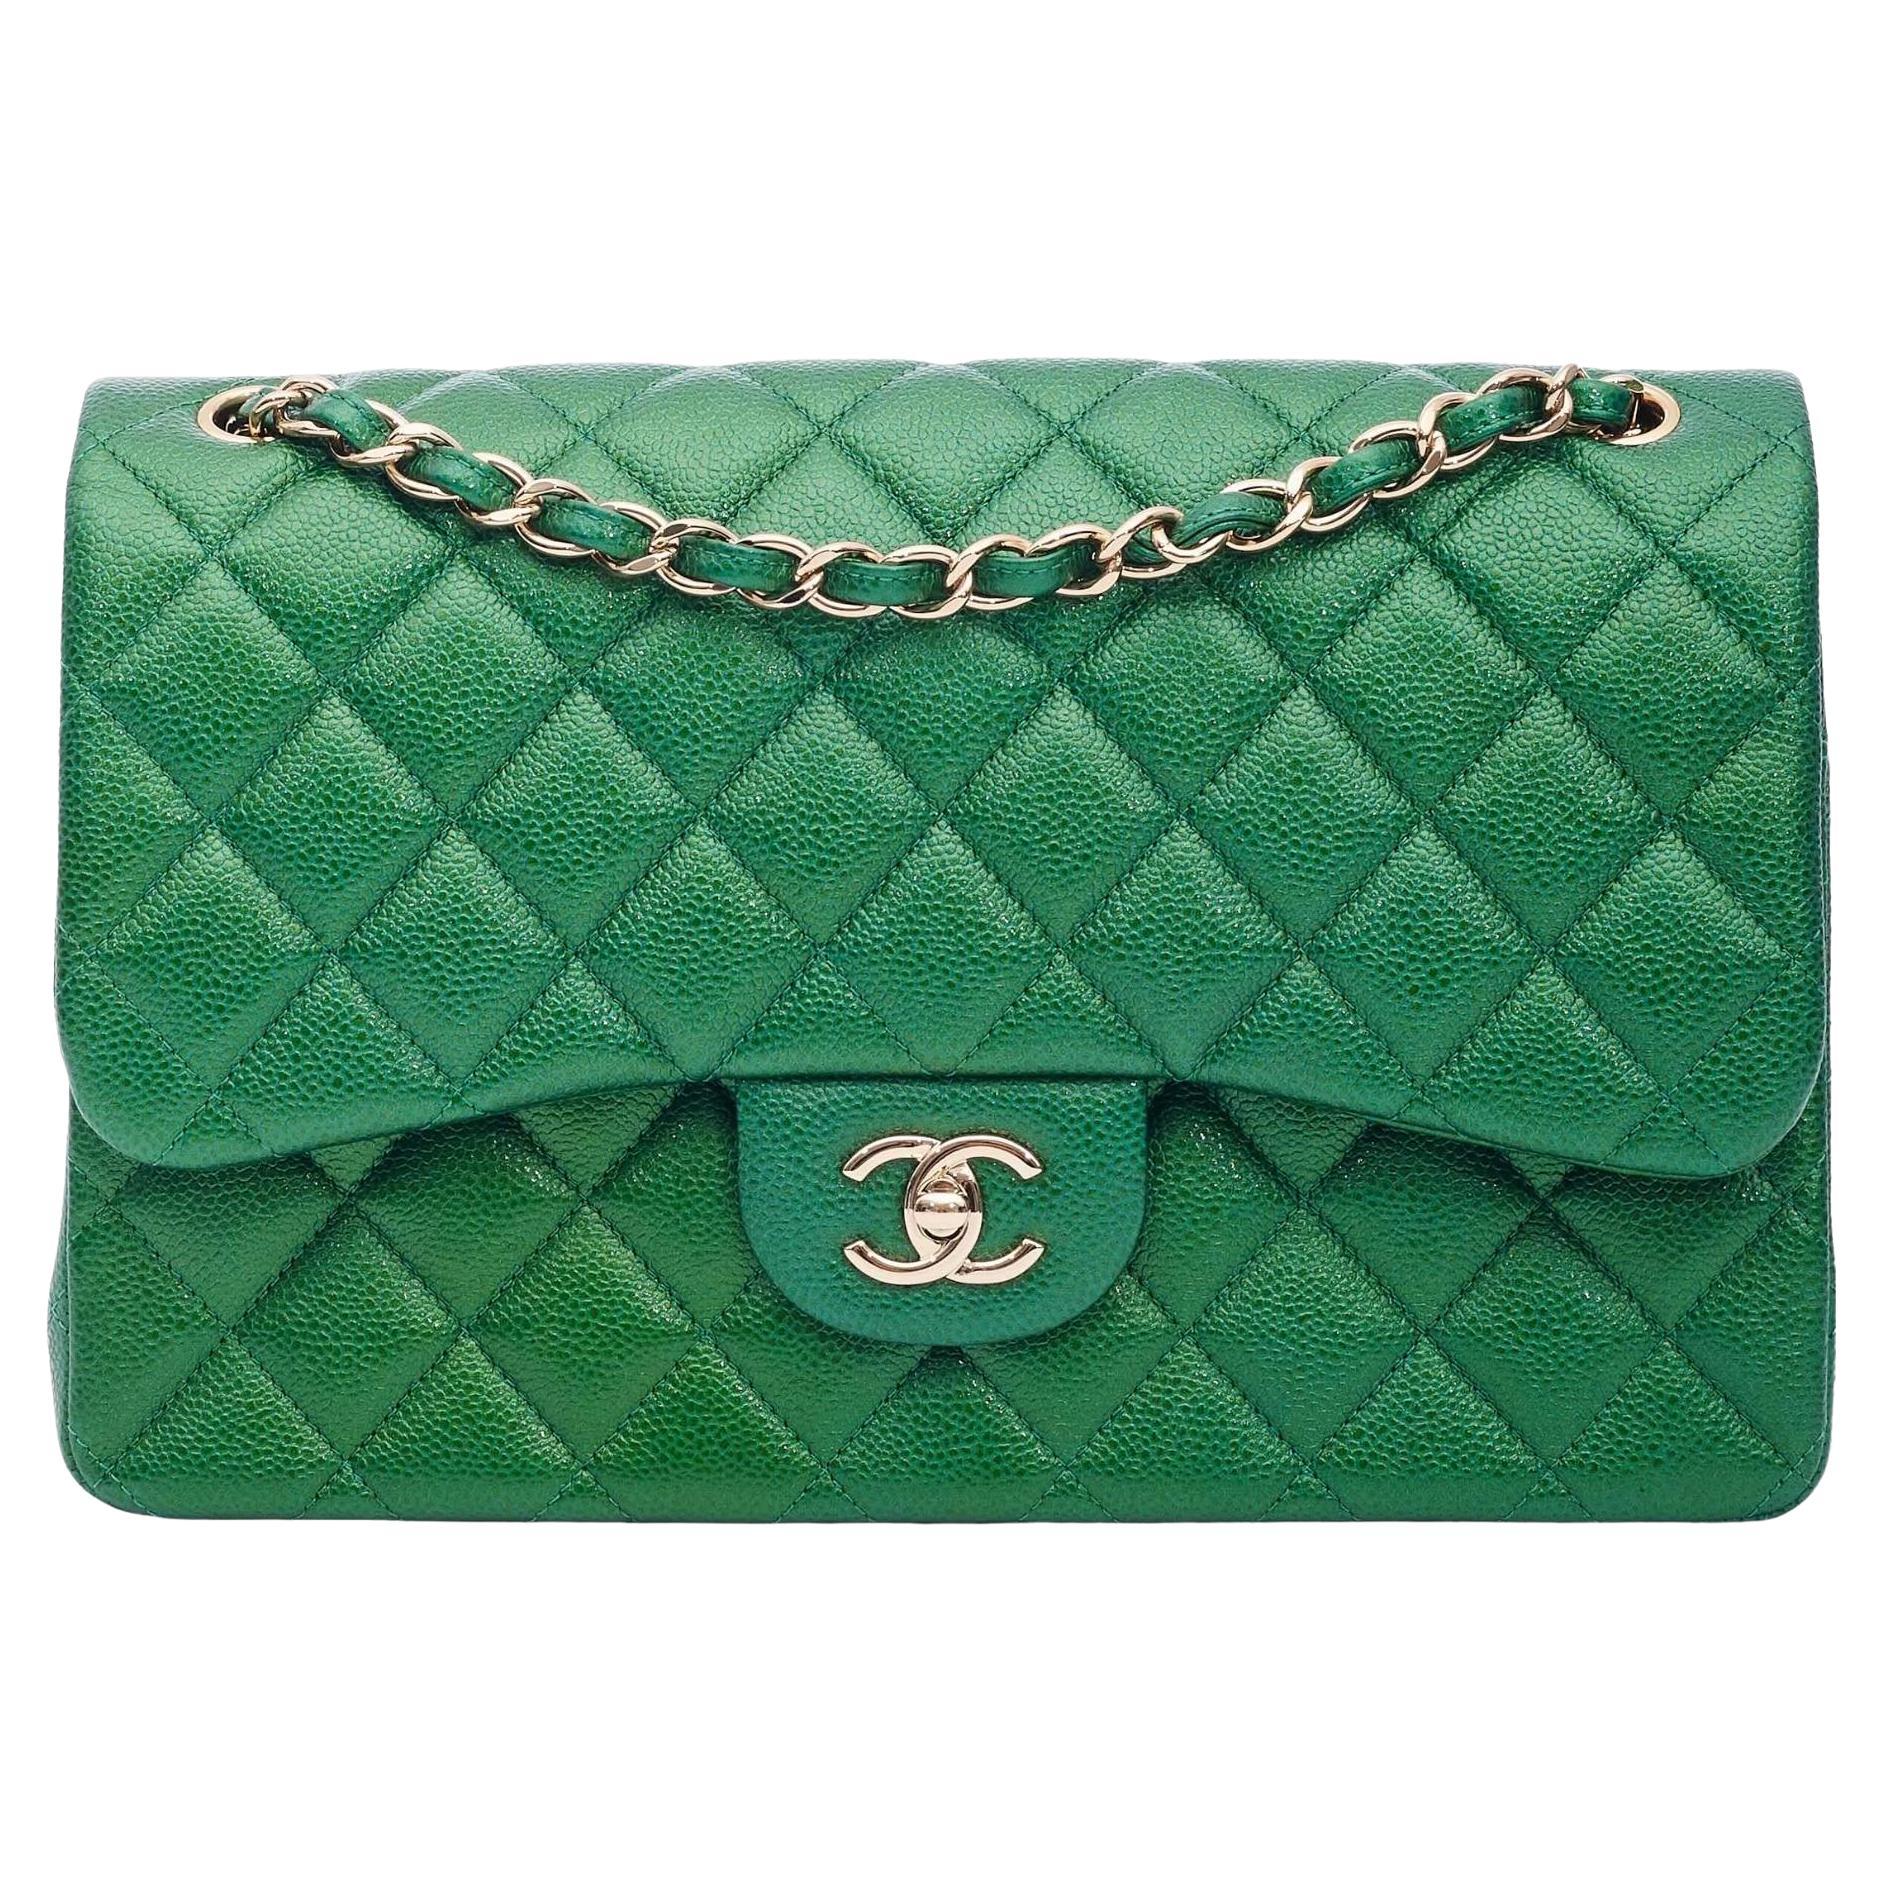 Chanel Caviar Pearly Green Leather Jumbo Classic Double Flap Bag 2018s W Gold